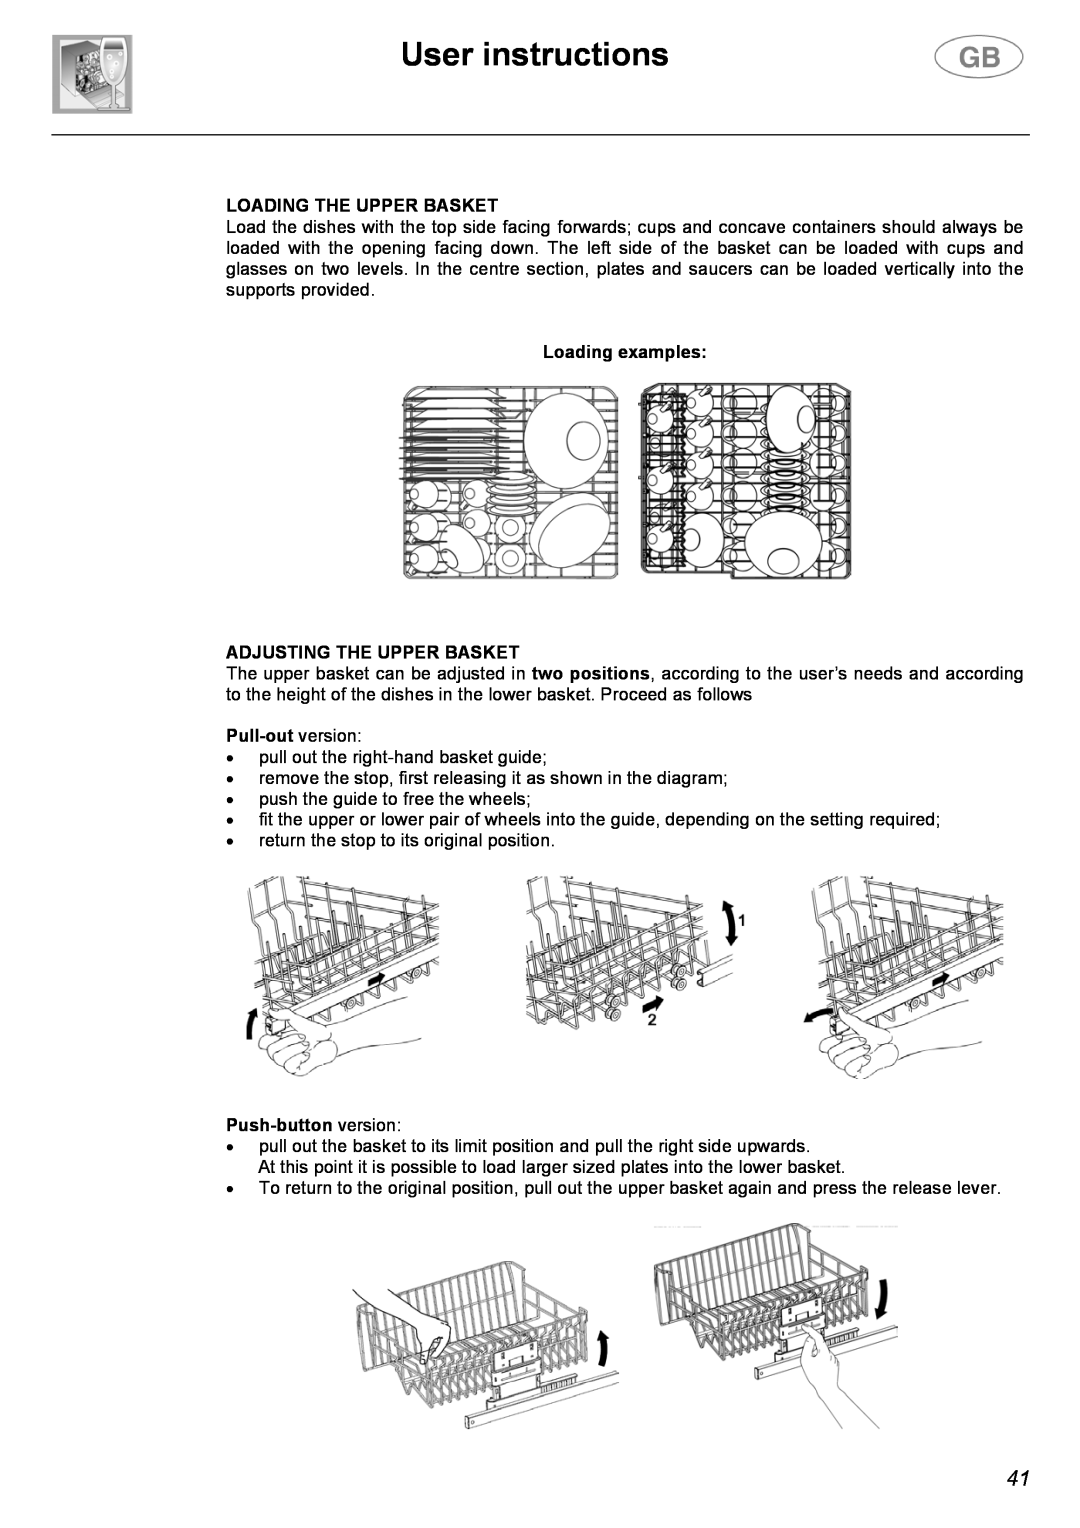 Smeg DW612ST User instructions, Loading The Upper Basket, Loading examples ADJUSTING THE UPPER BASKET, Pull-out version 